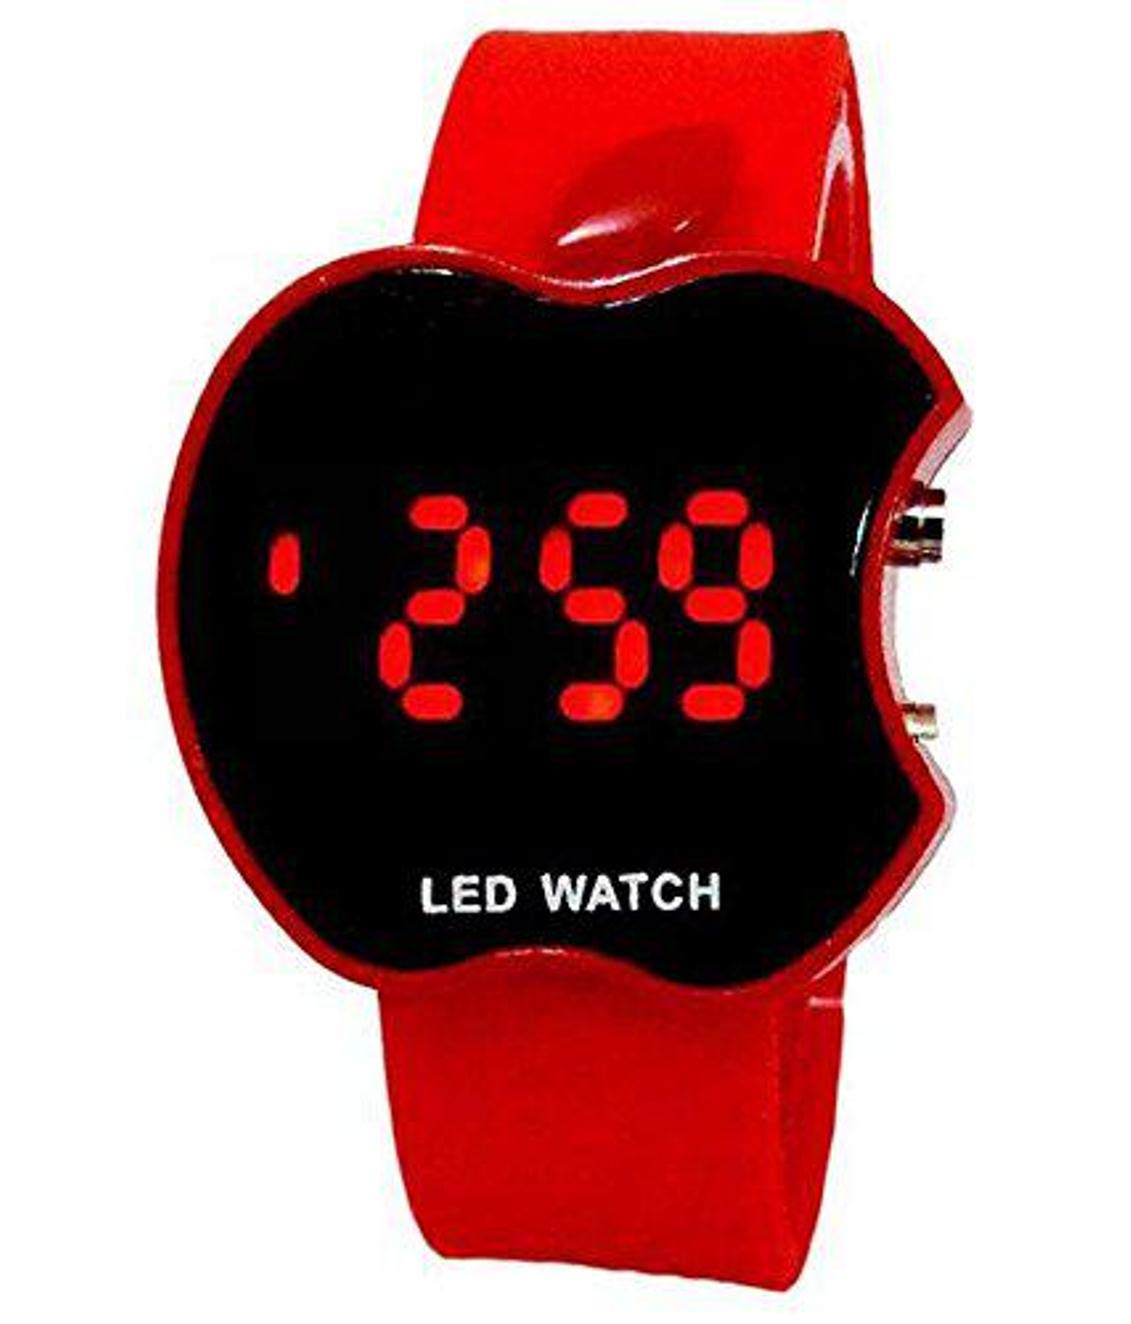 Emartos LED Apple shape Band Watch Style/Look Digital Sports Watch with Date for Boys/Girls( Red)